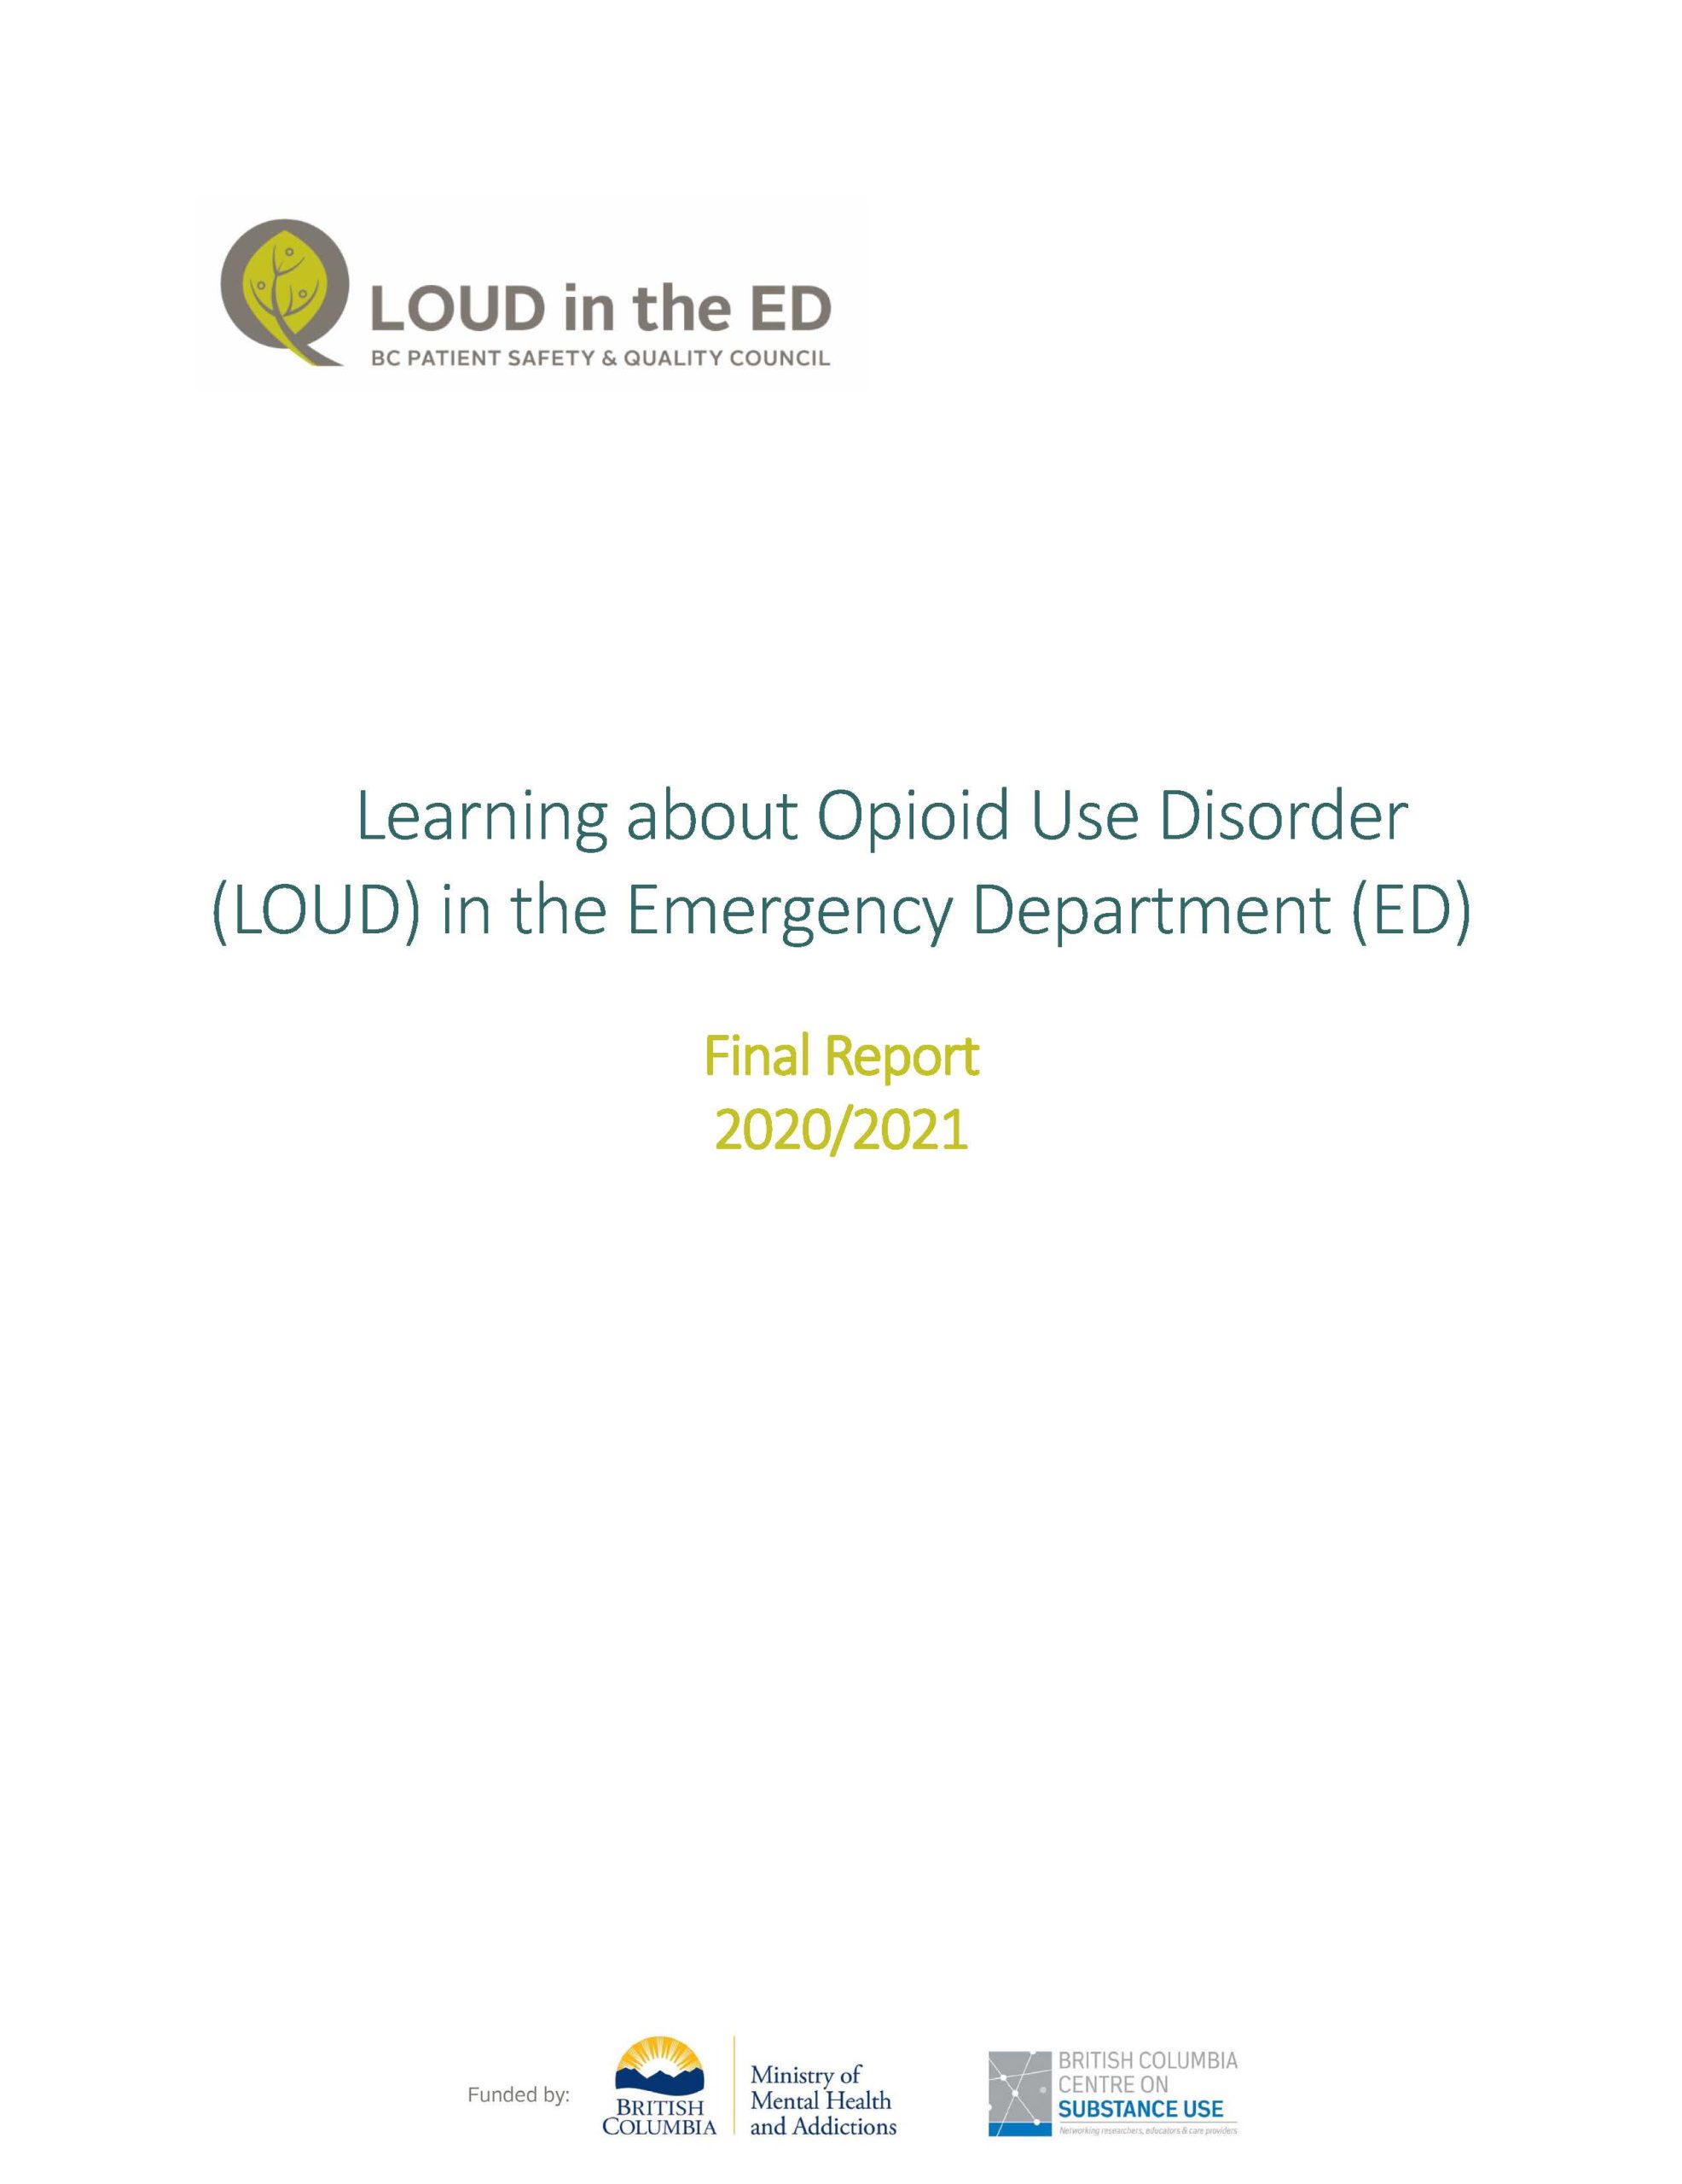 Learning about Opioid Use Disorder LOUD in the Emergency Department ED Cover